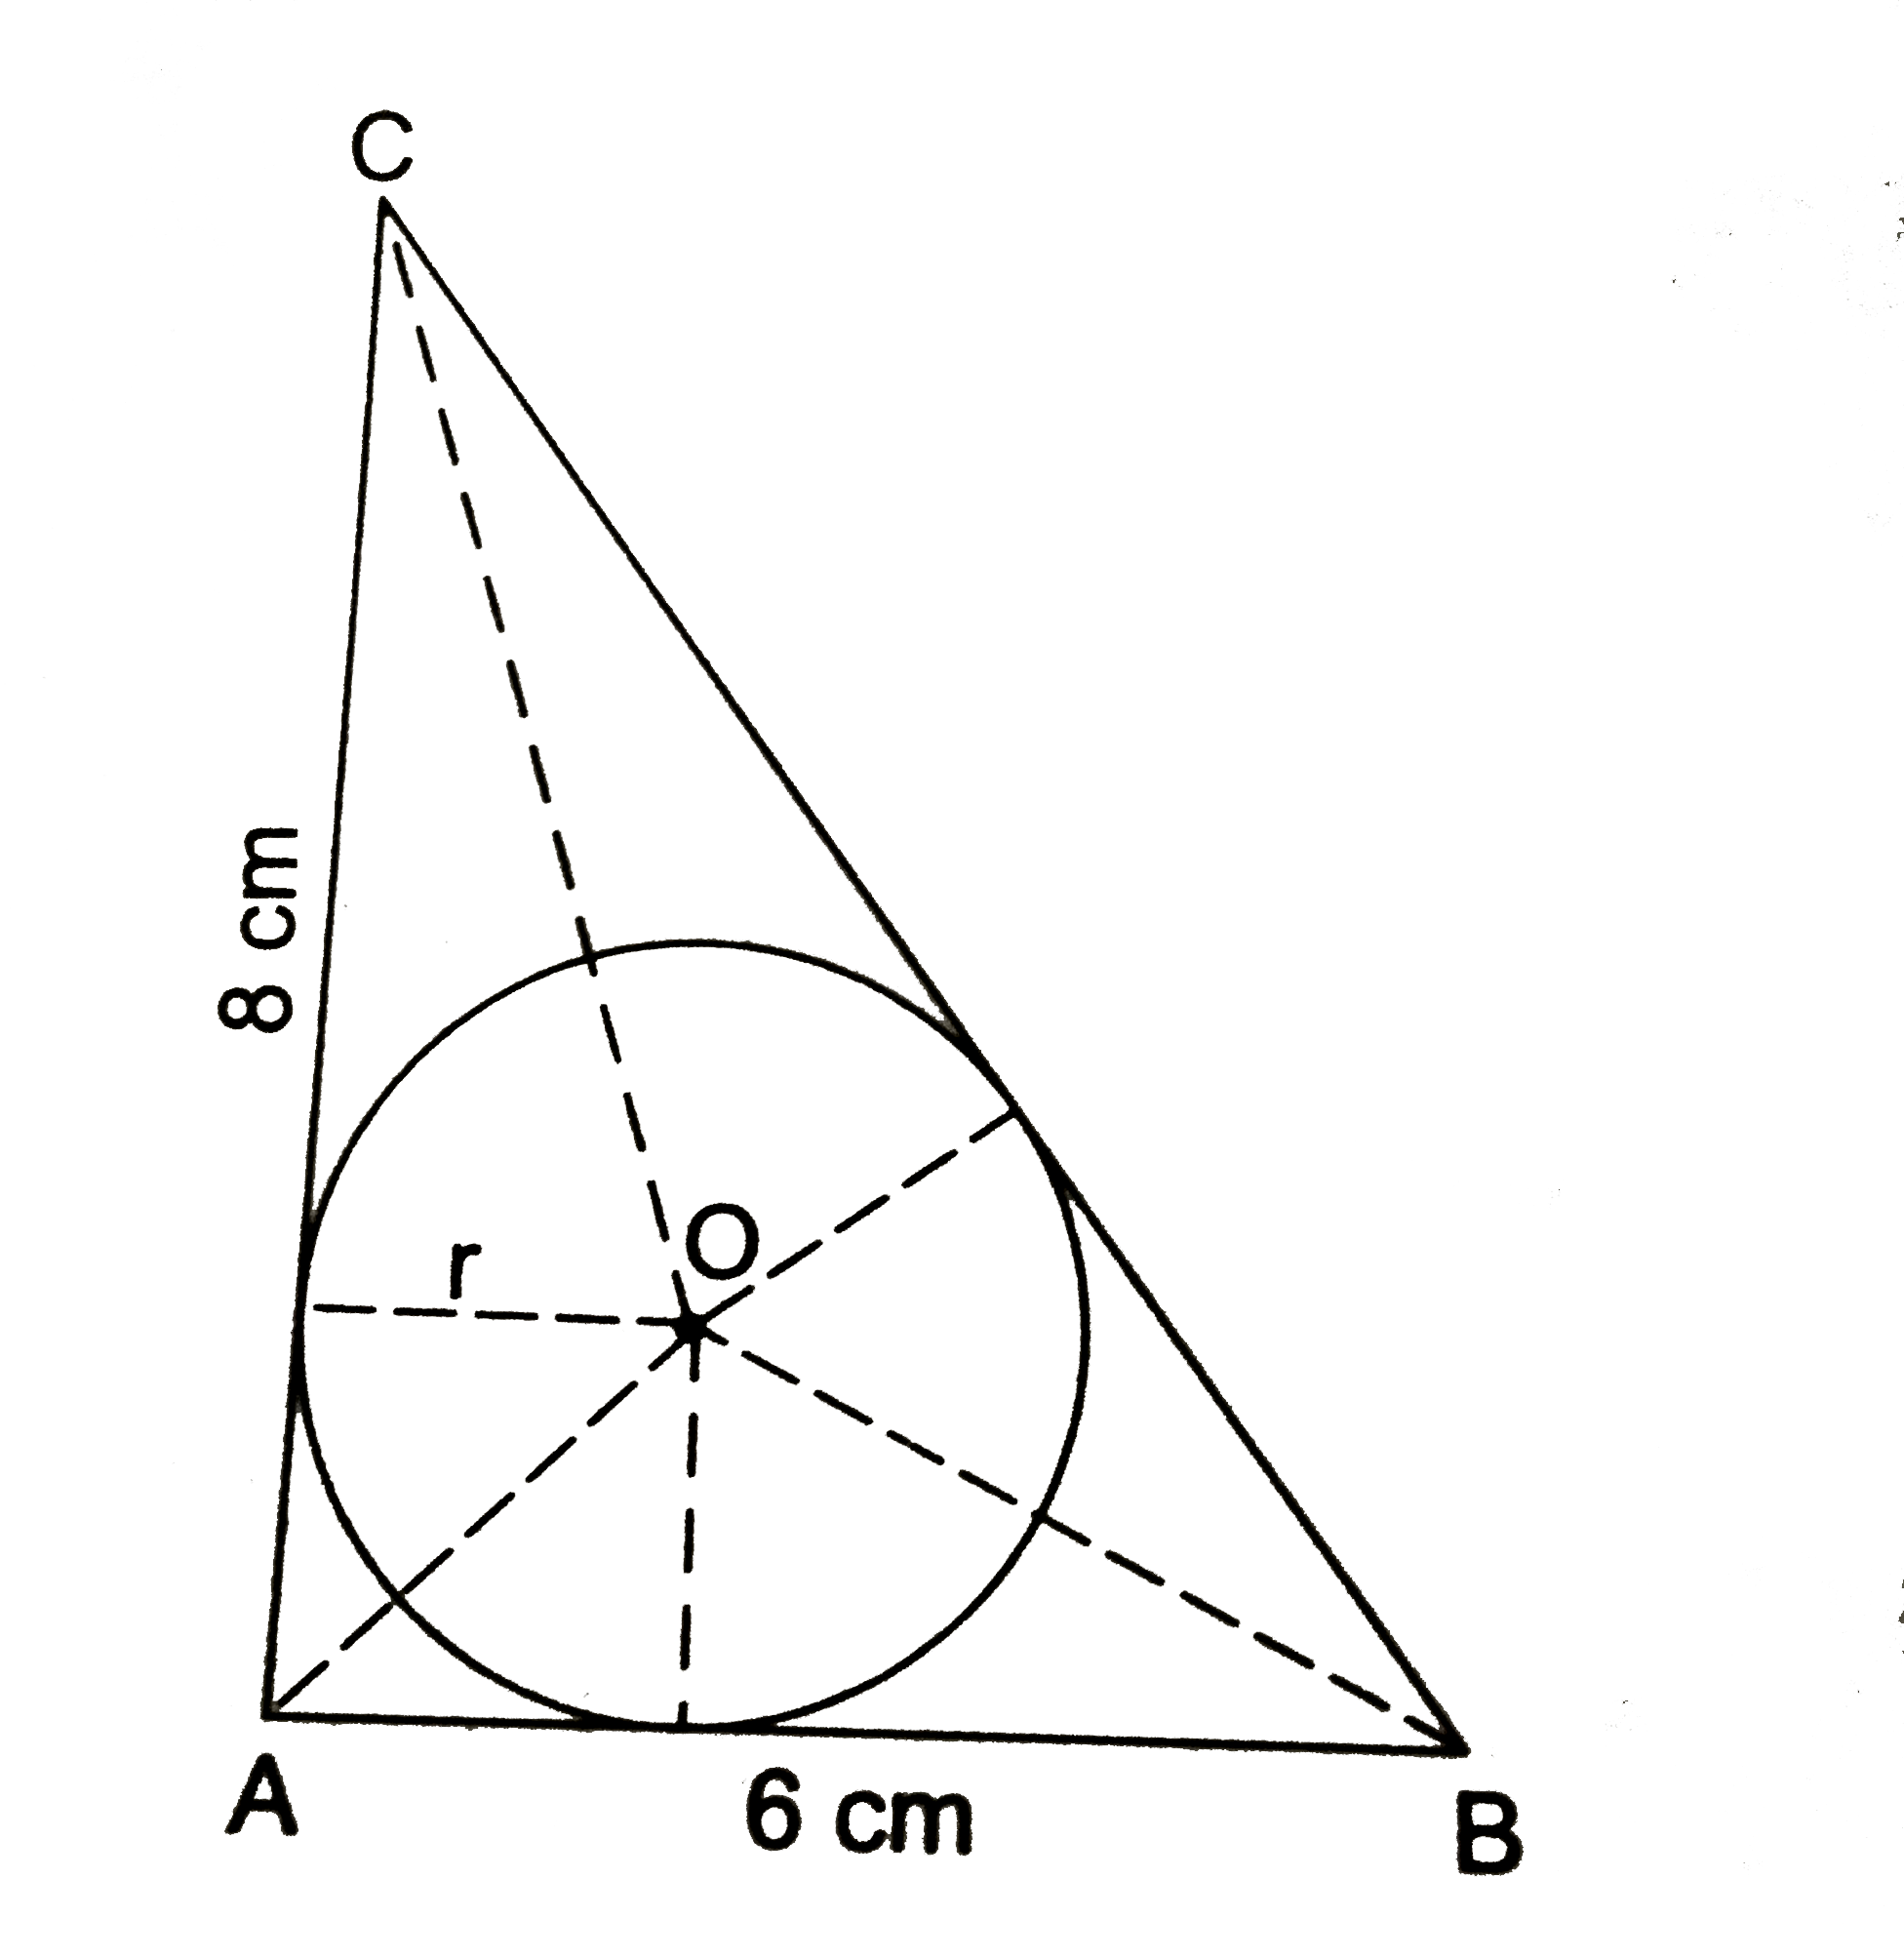 In the given figure Delta ABC is right angle at A with AB=6 cm and AC=8 cm. A circle with centre O has been inscribed inside the triangle. Find the value of r, the radius of the inscribed circle.